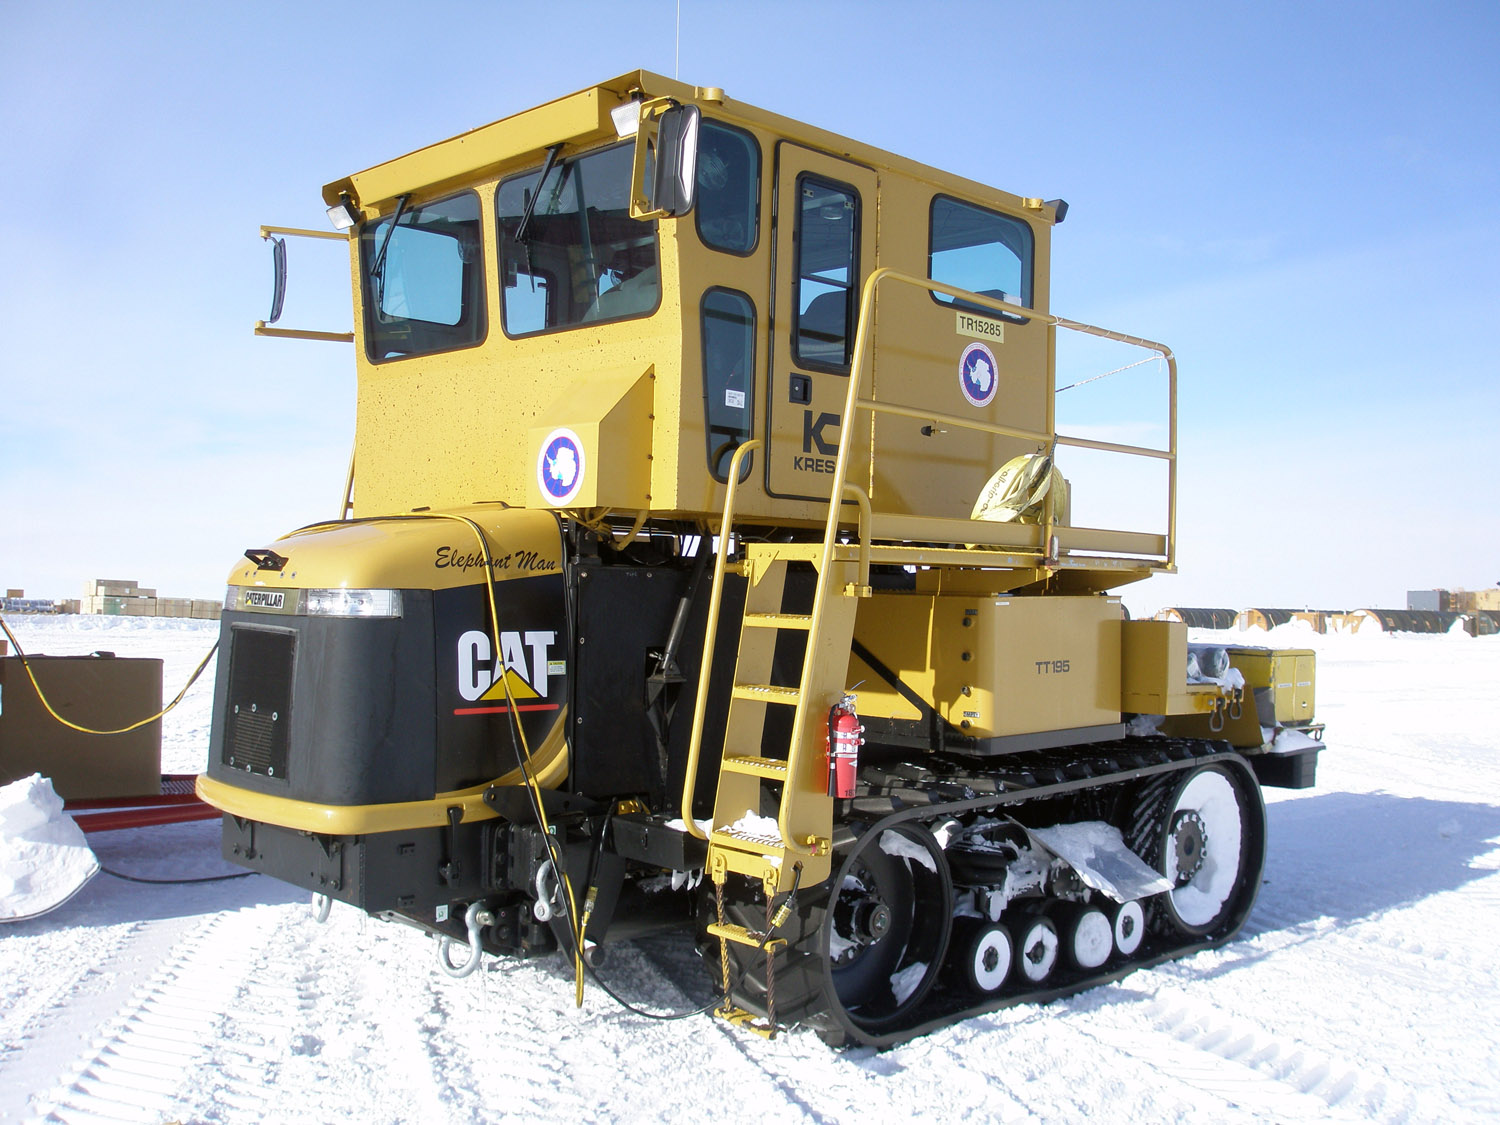 Vehicles and equipment of the South Pole Traverse - 09